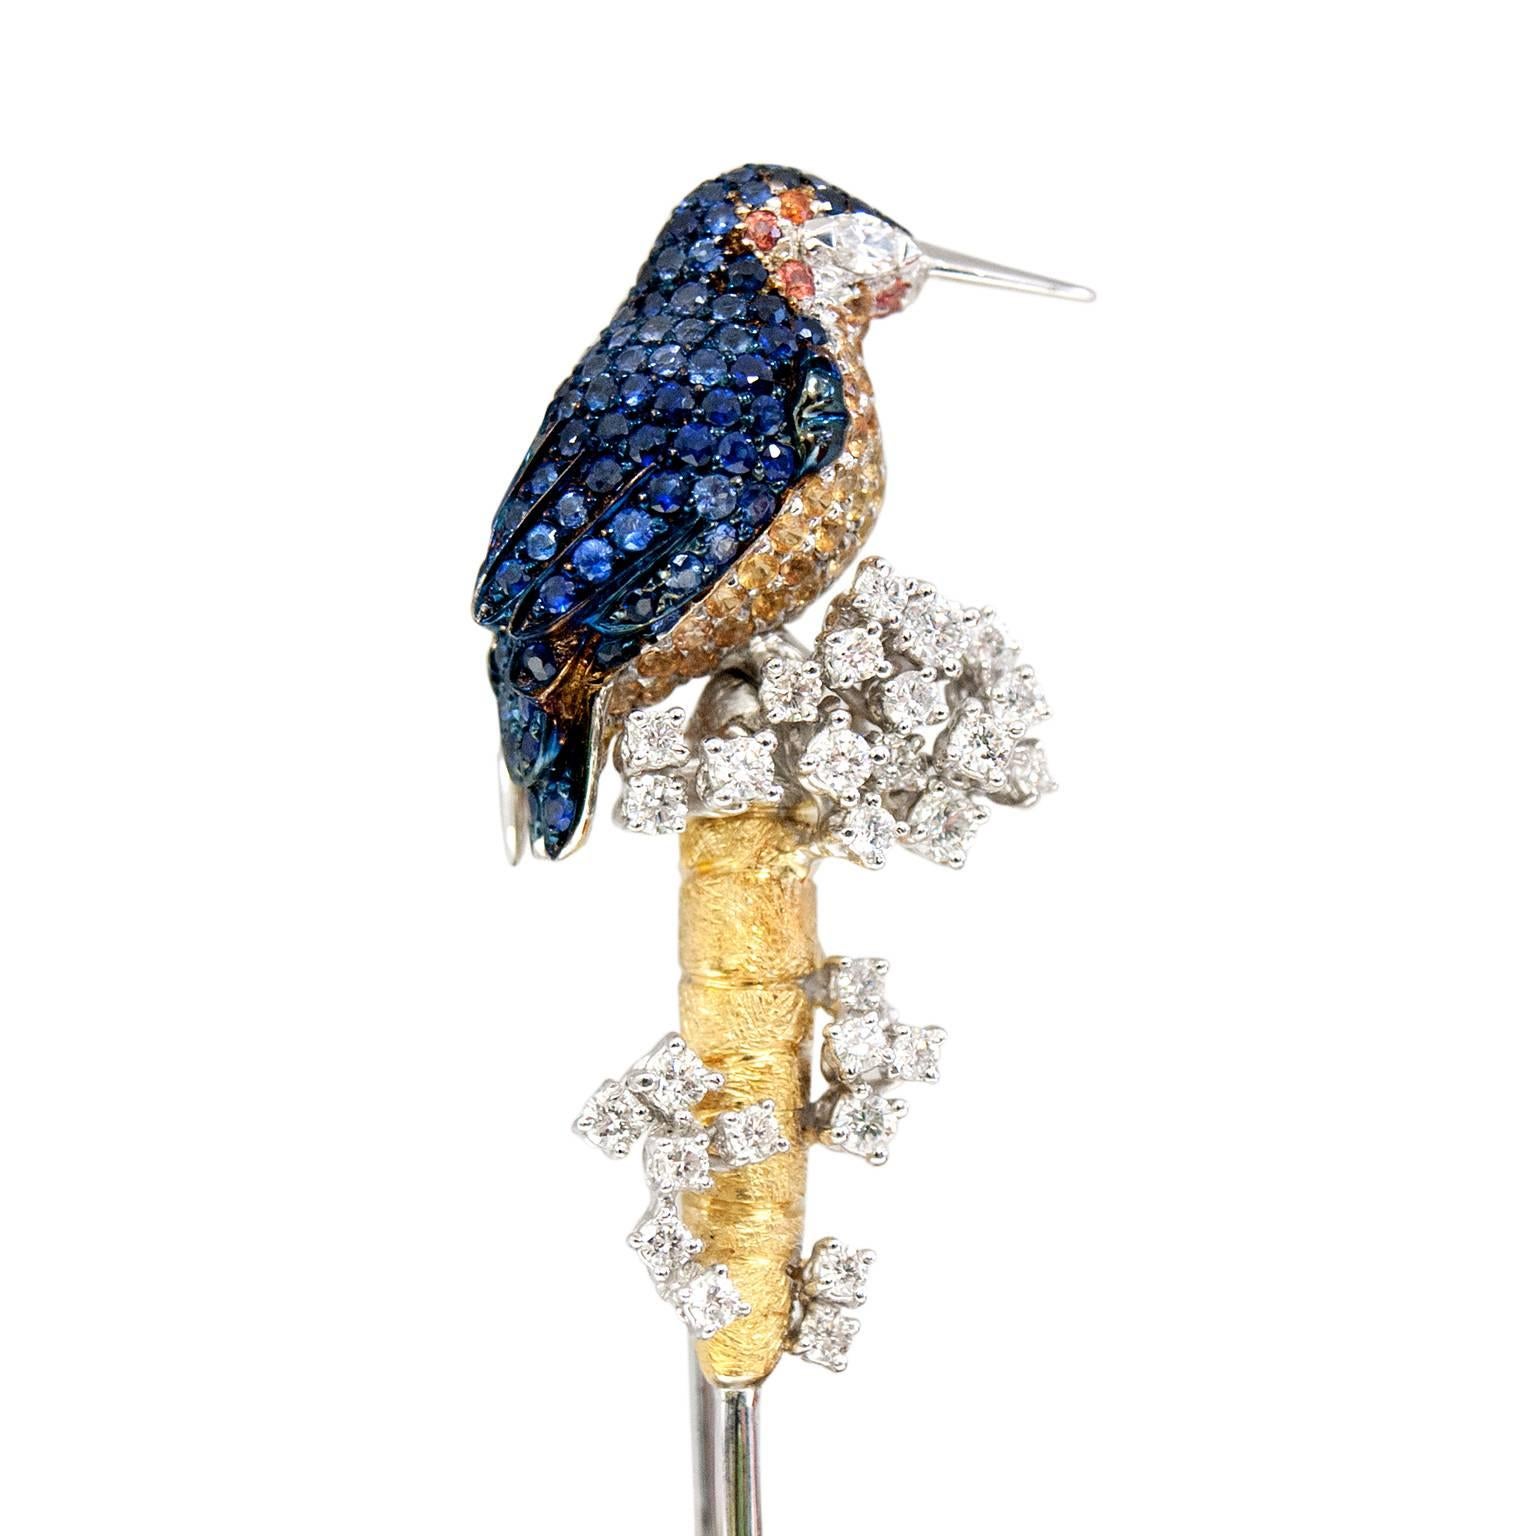 This is an elegant brooch with a kingfisher covered by many bright color stones such as sapphires. 
The eye of this intriguing river bird is a diamond navette cut.
The bird is perched on a flower in a lake, this flower is yellow gold and features